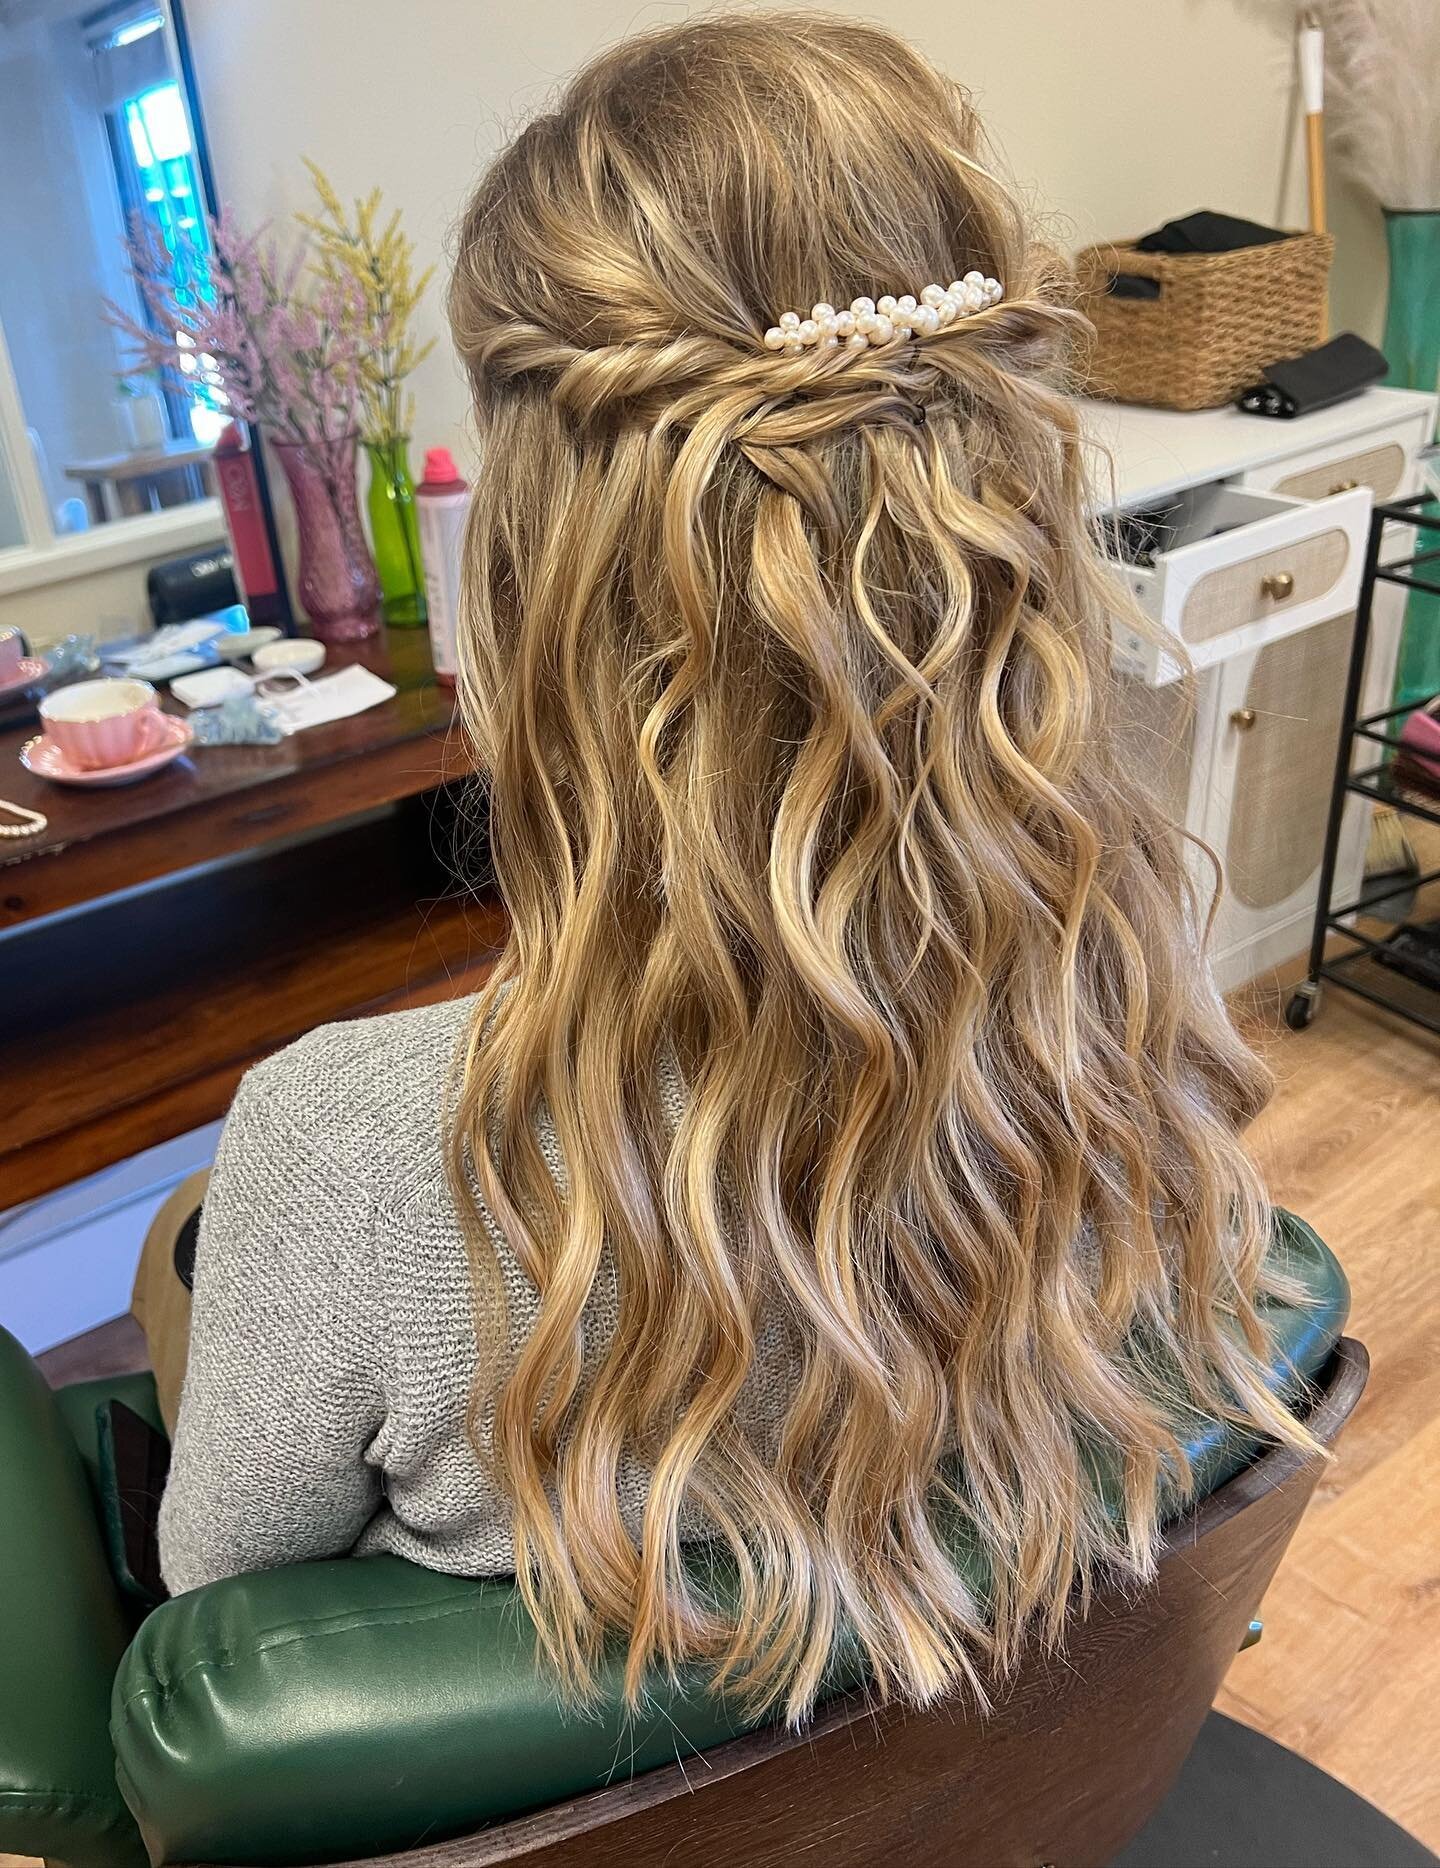 In a wedding trial for hair, I like to throw in a few different versions of the look with pictures so you can look at them and think about what you like or didn't like. This also helps get rid of some nerves so you can stay calm day of. 🤗
Which one 